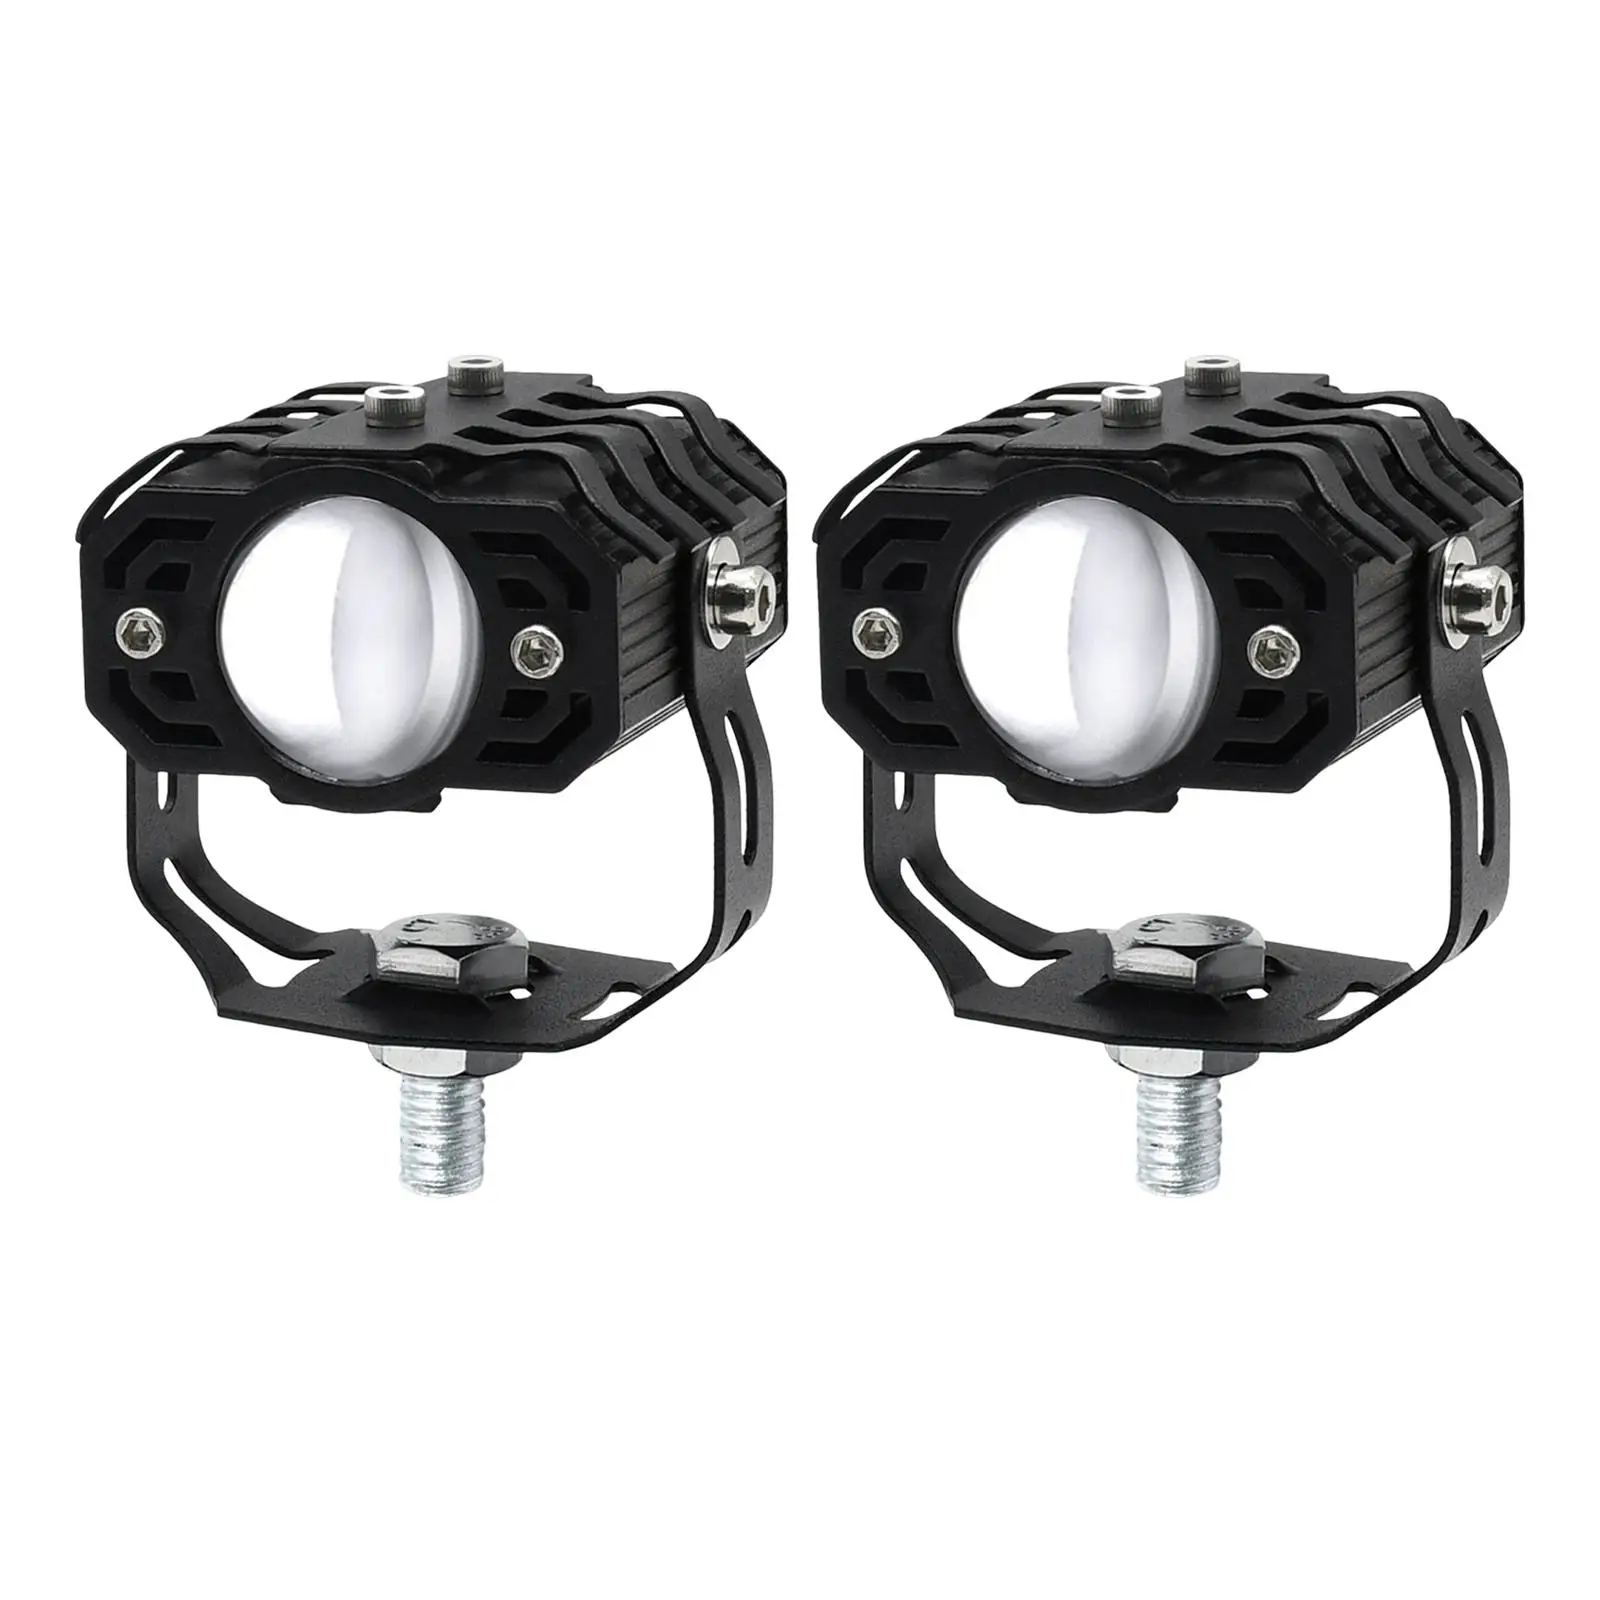 2x Motorcycle Auxiliary Driving Lights Spotlight Front Assembly for SUV